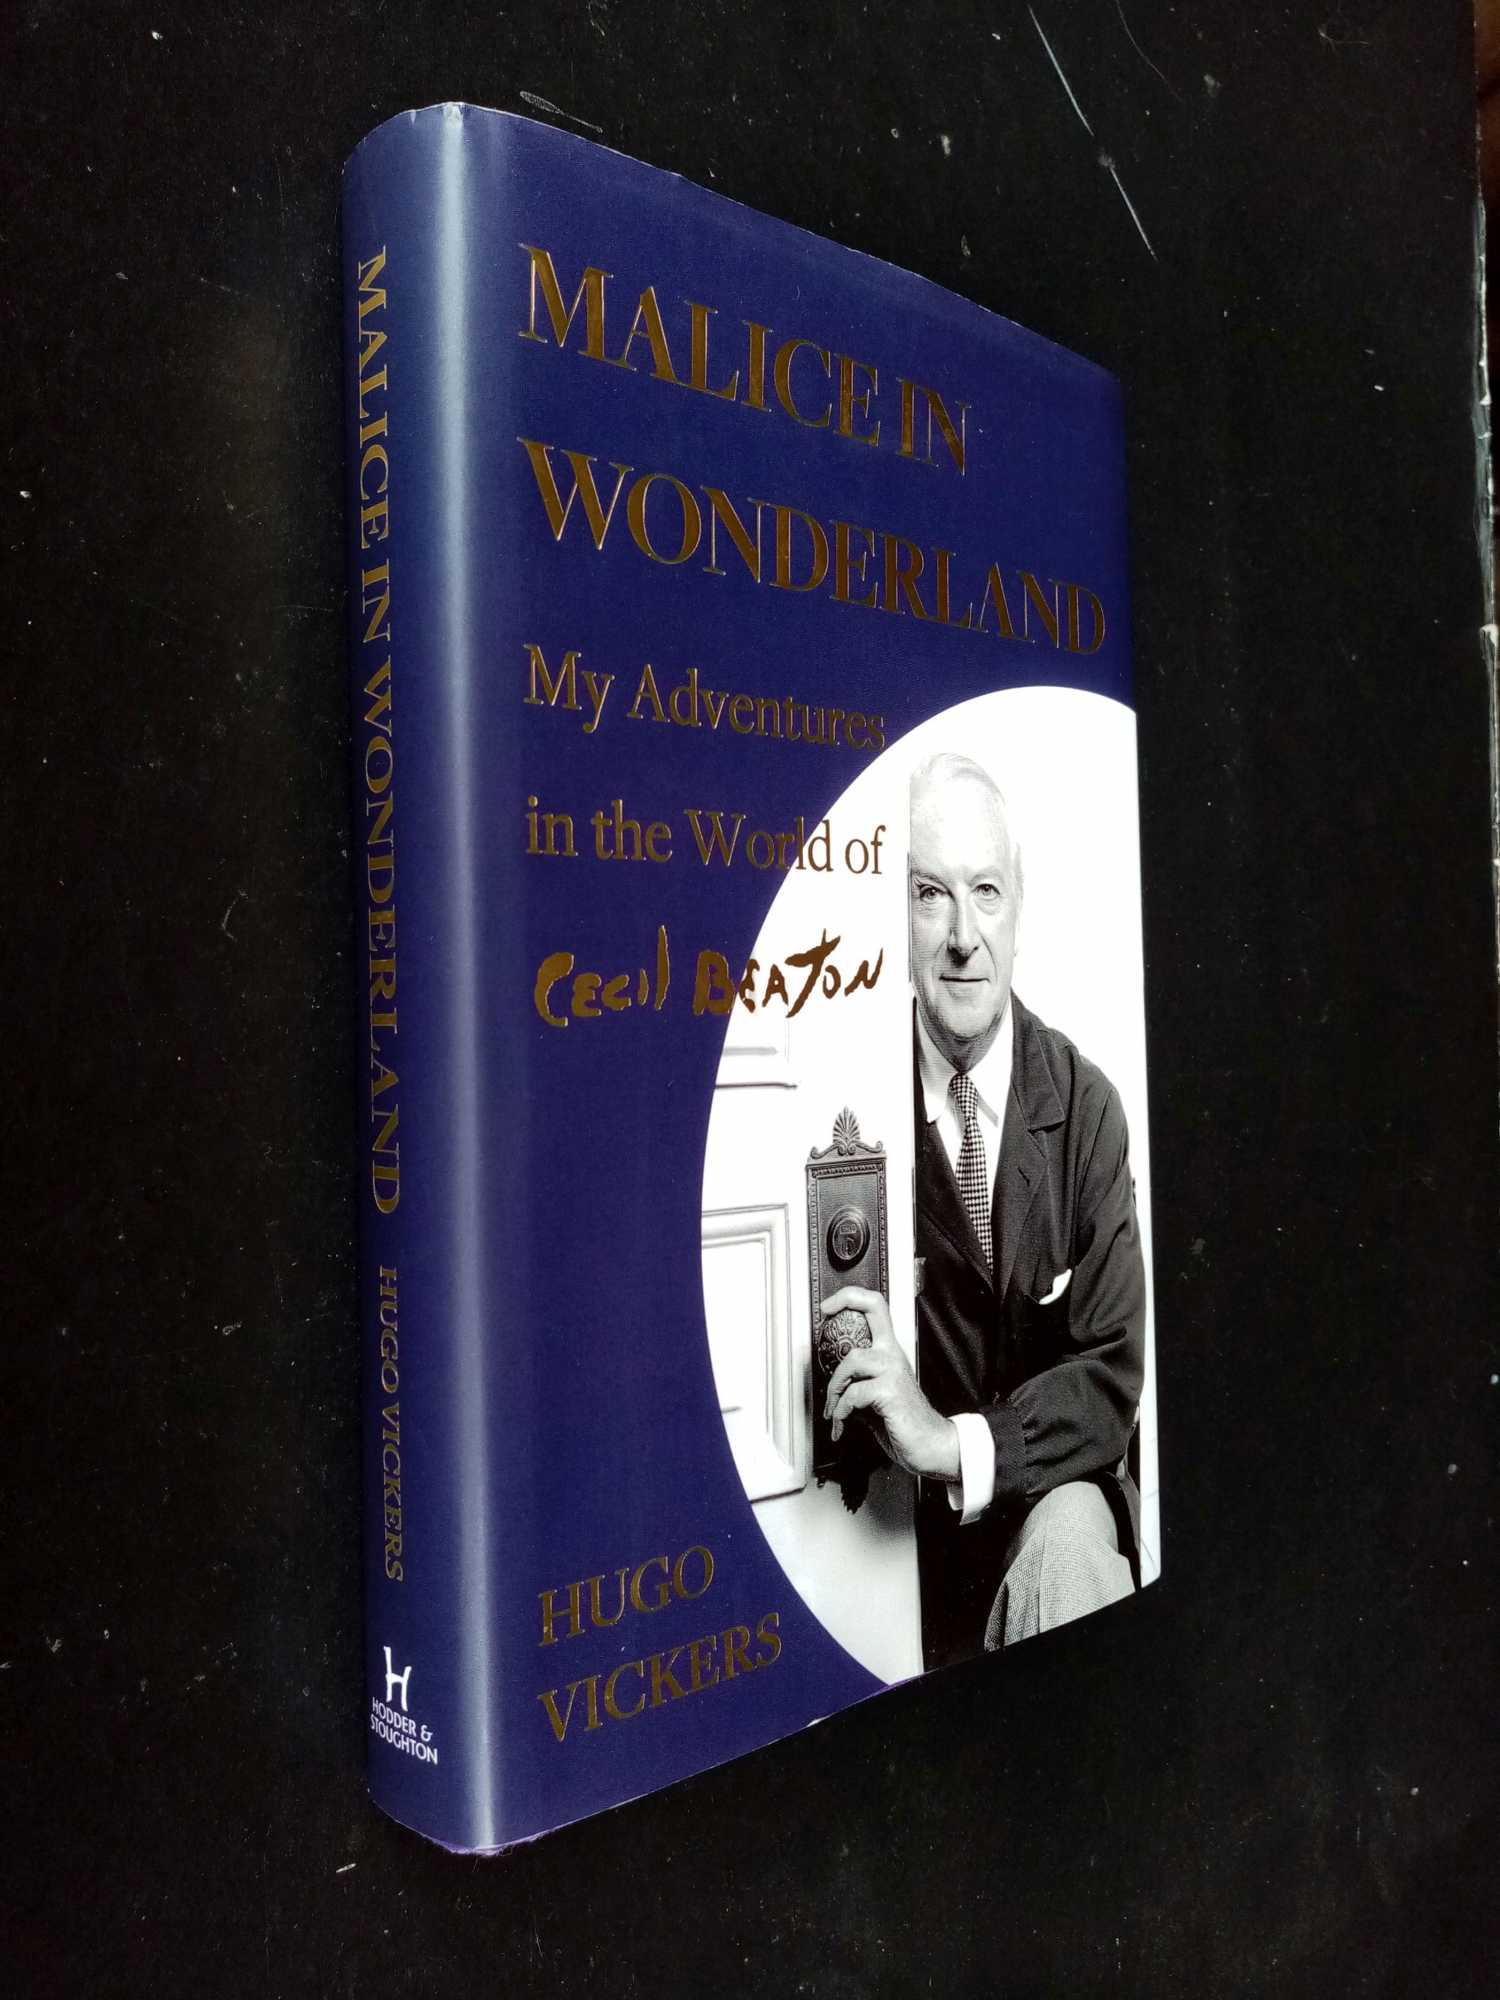 Hugo Vickers - Malice in Wonderland: My Adventures in the World of Cecil Beaton